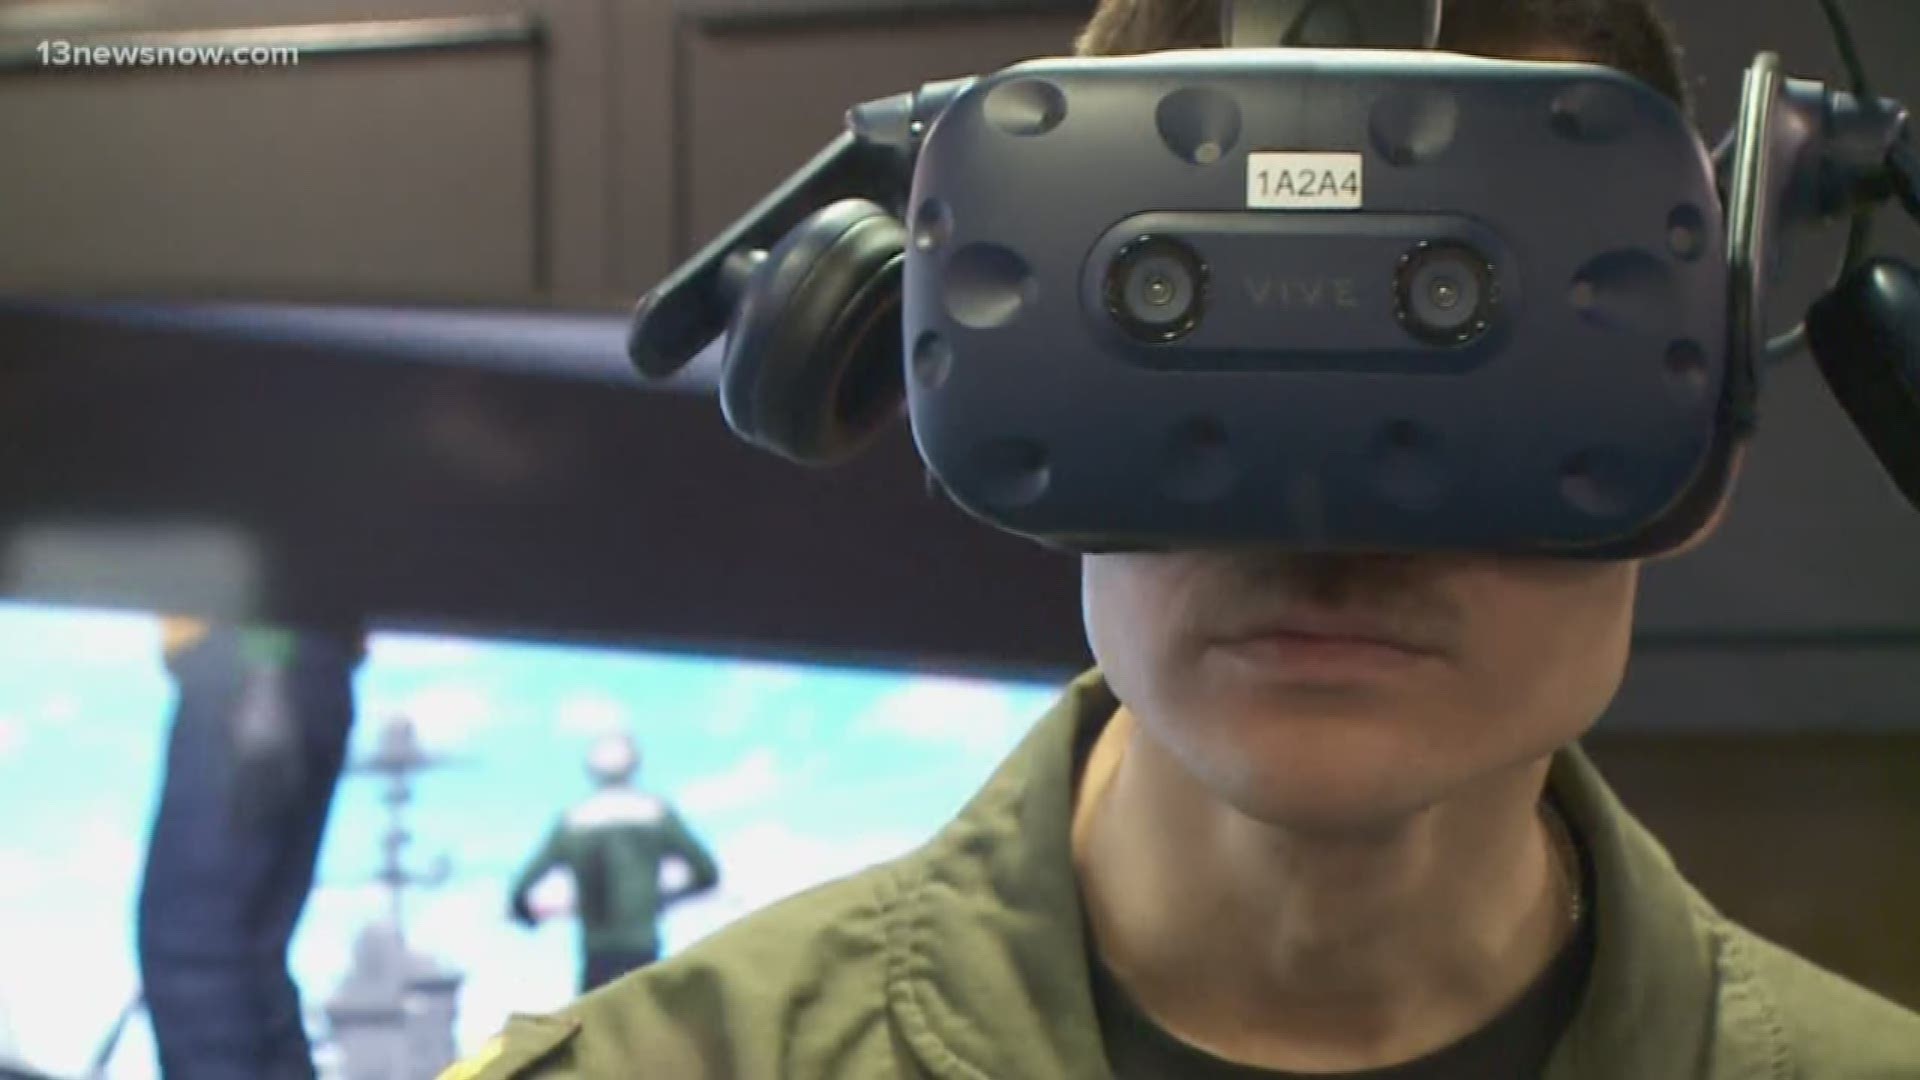 Virtual reality technology helps prepare Navy sailors for deployment. Mike Gooding was at Naval Station Norfolk to check out their new high tech learning center.